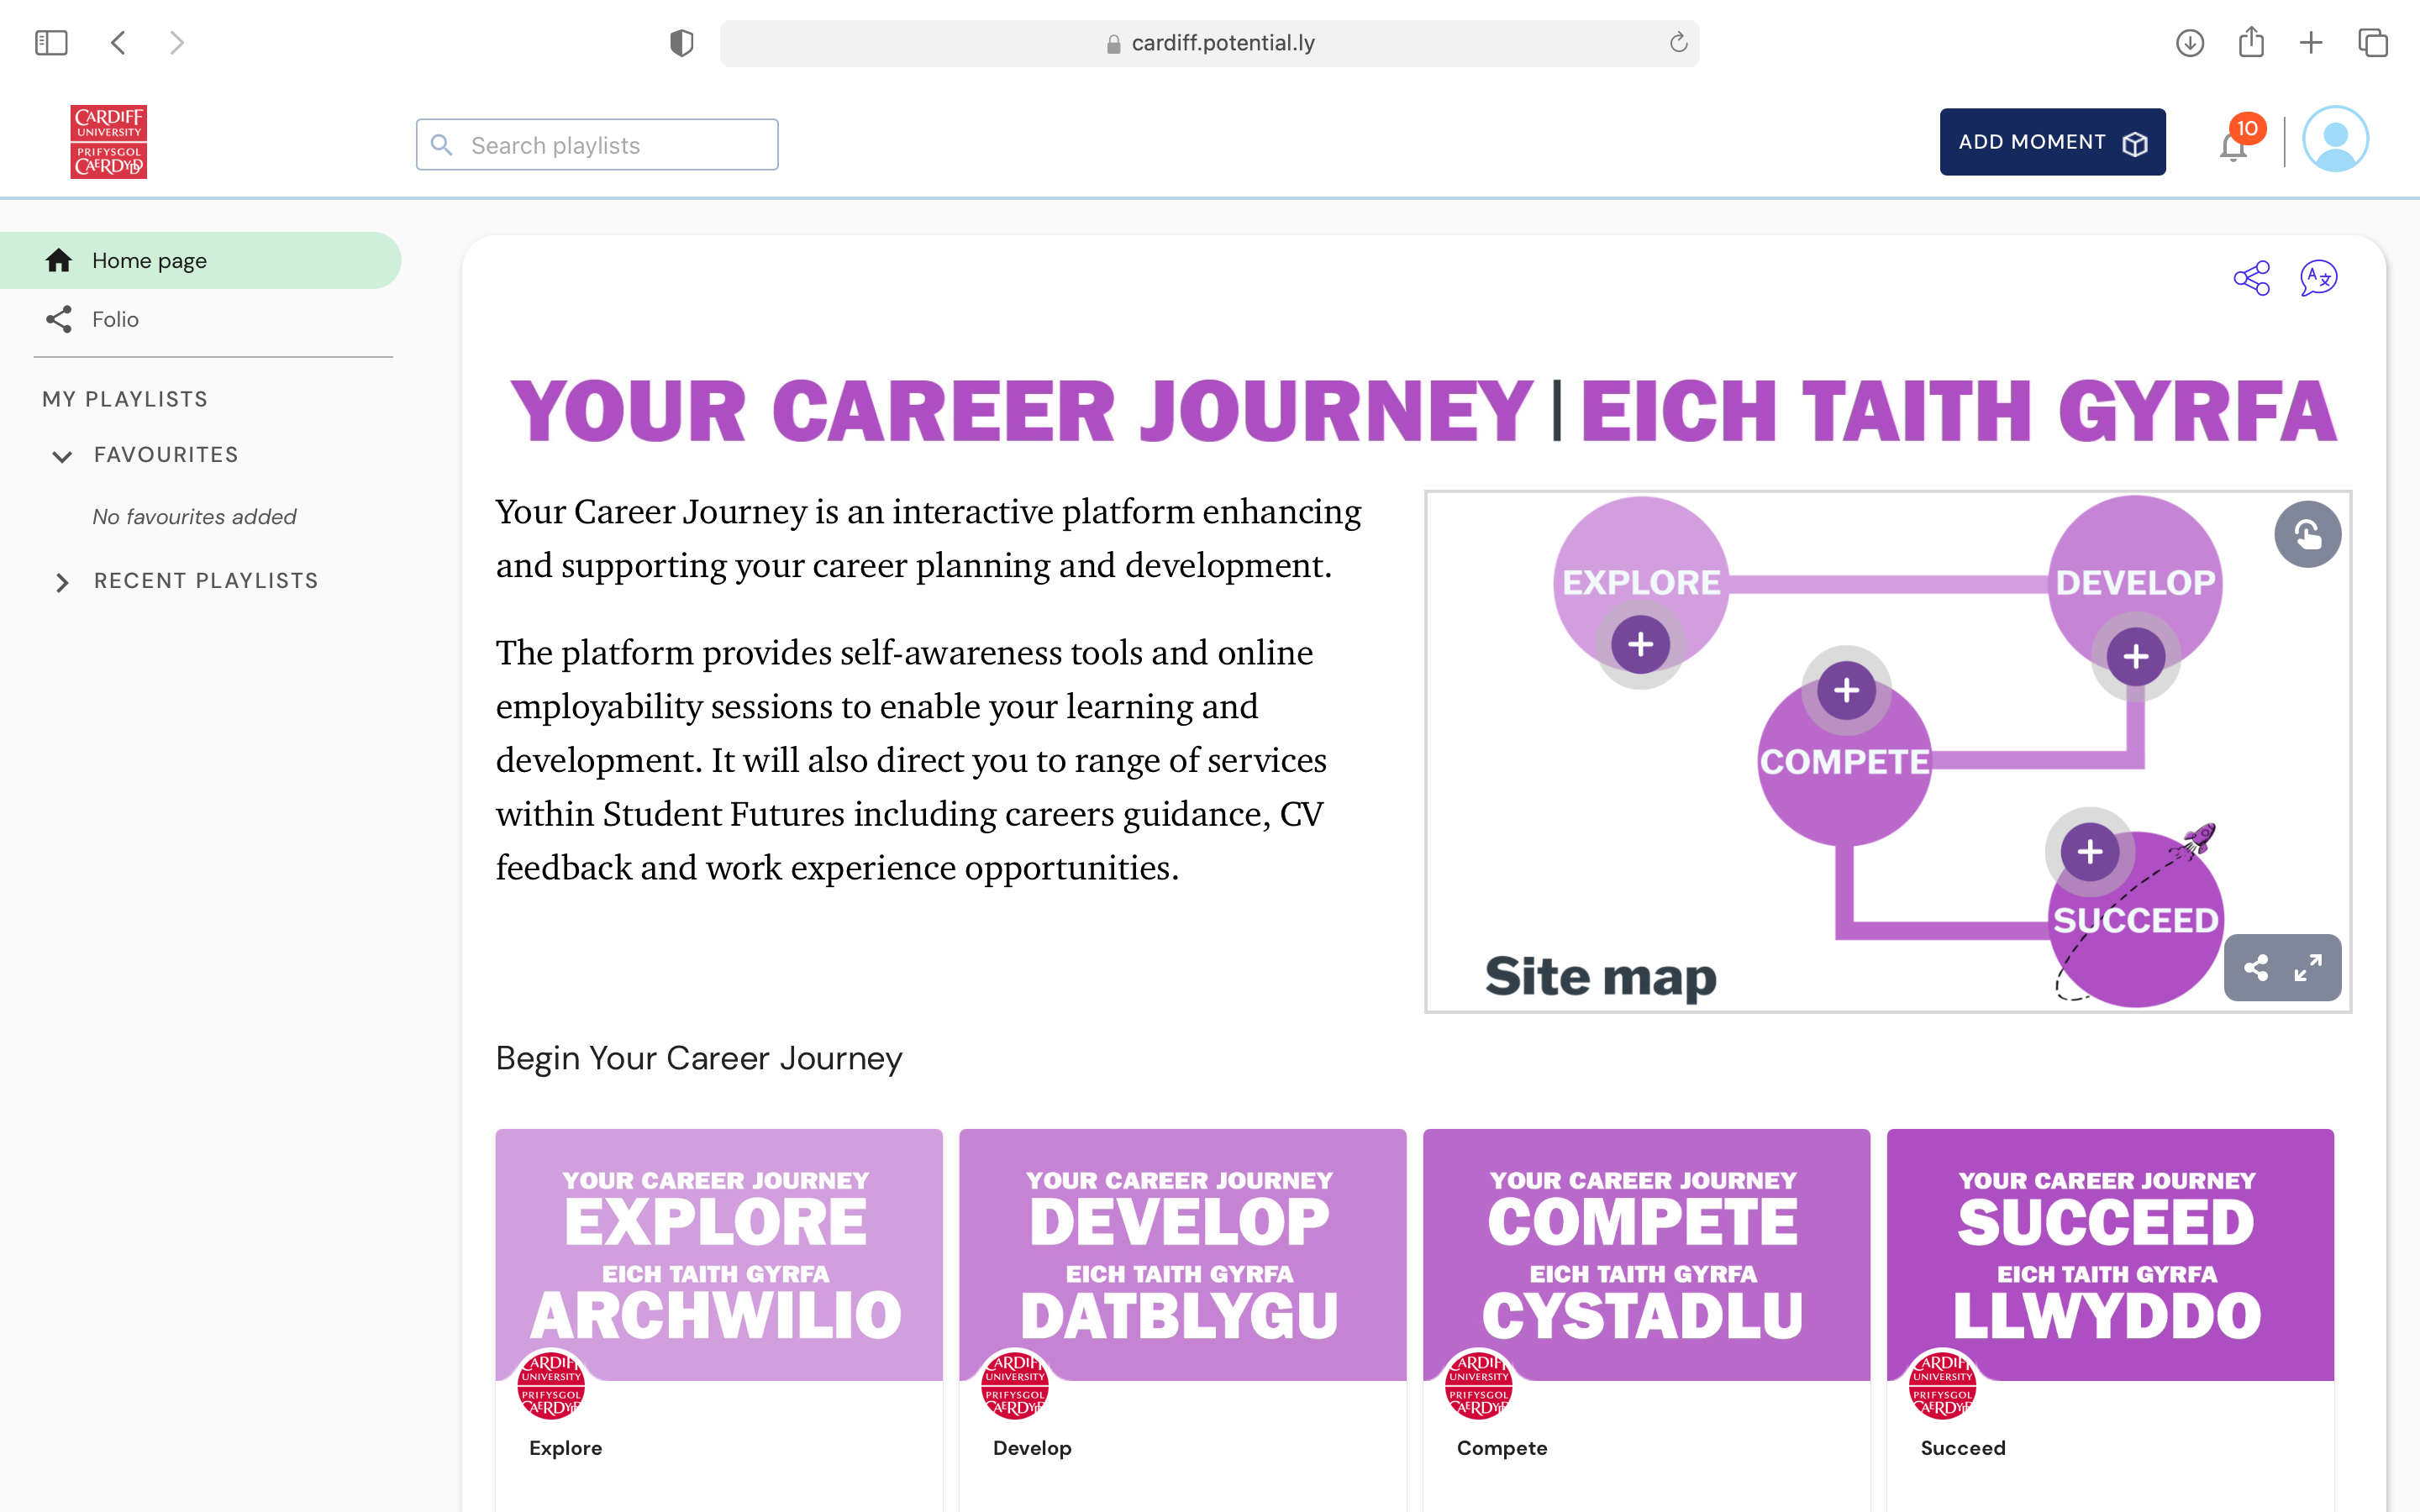 This is how Your Career Journey will look like. You can access various resources here.